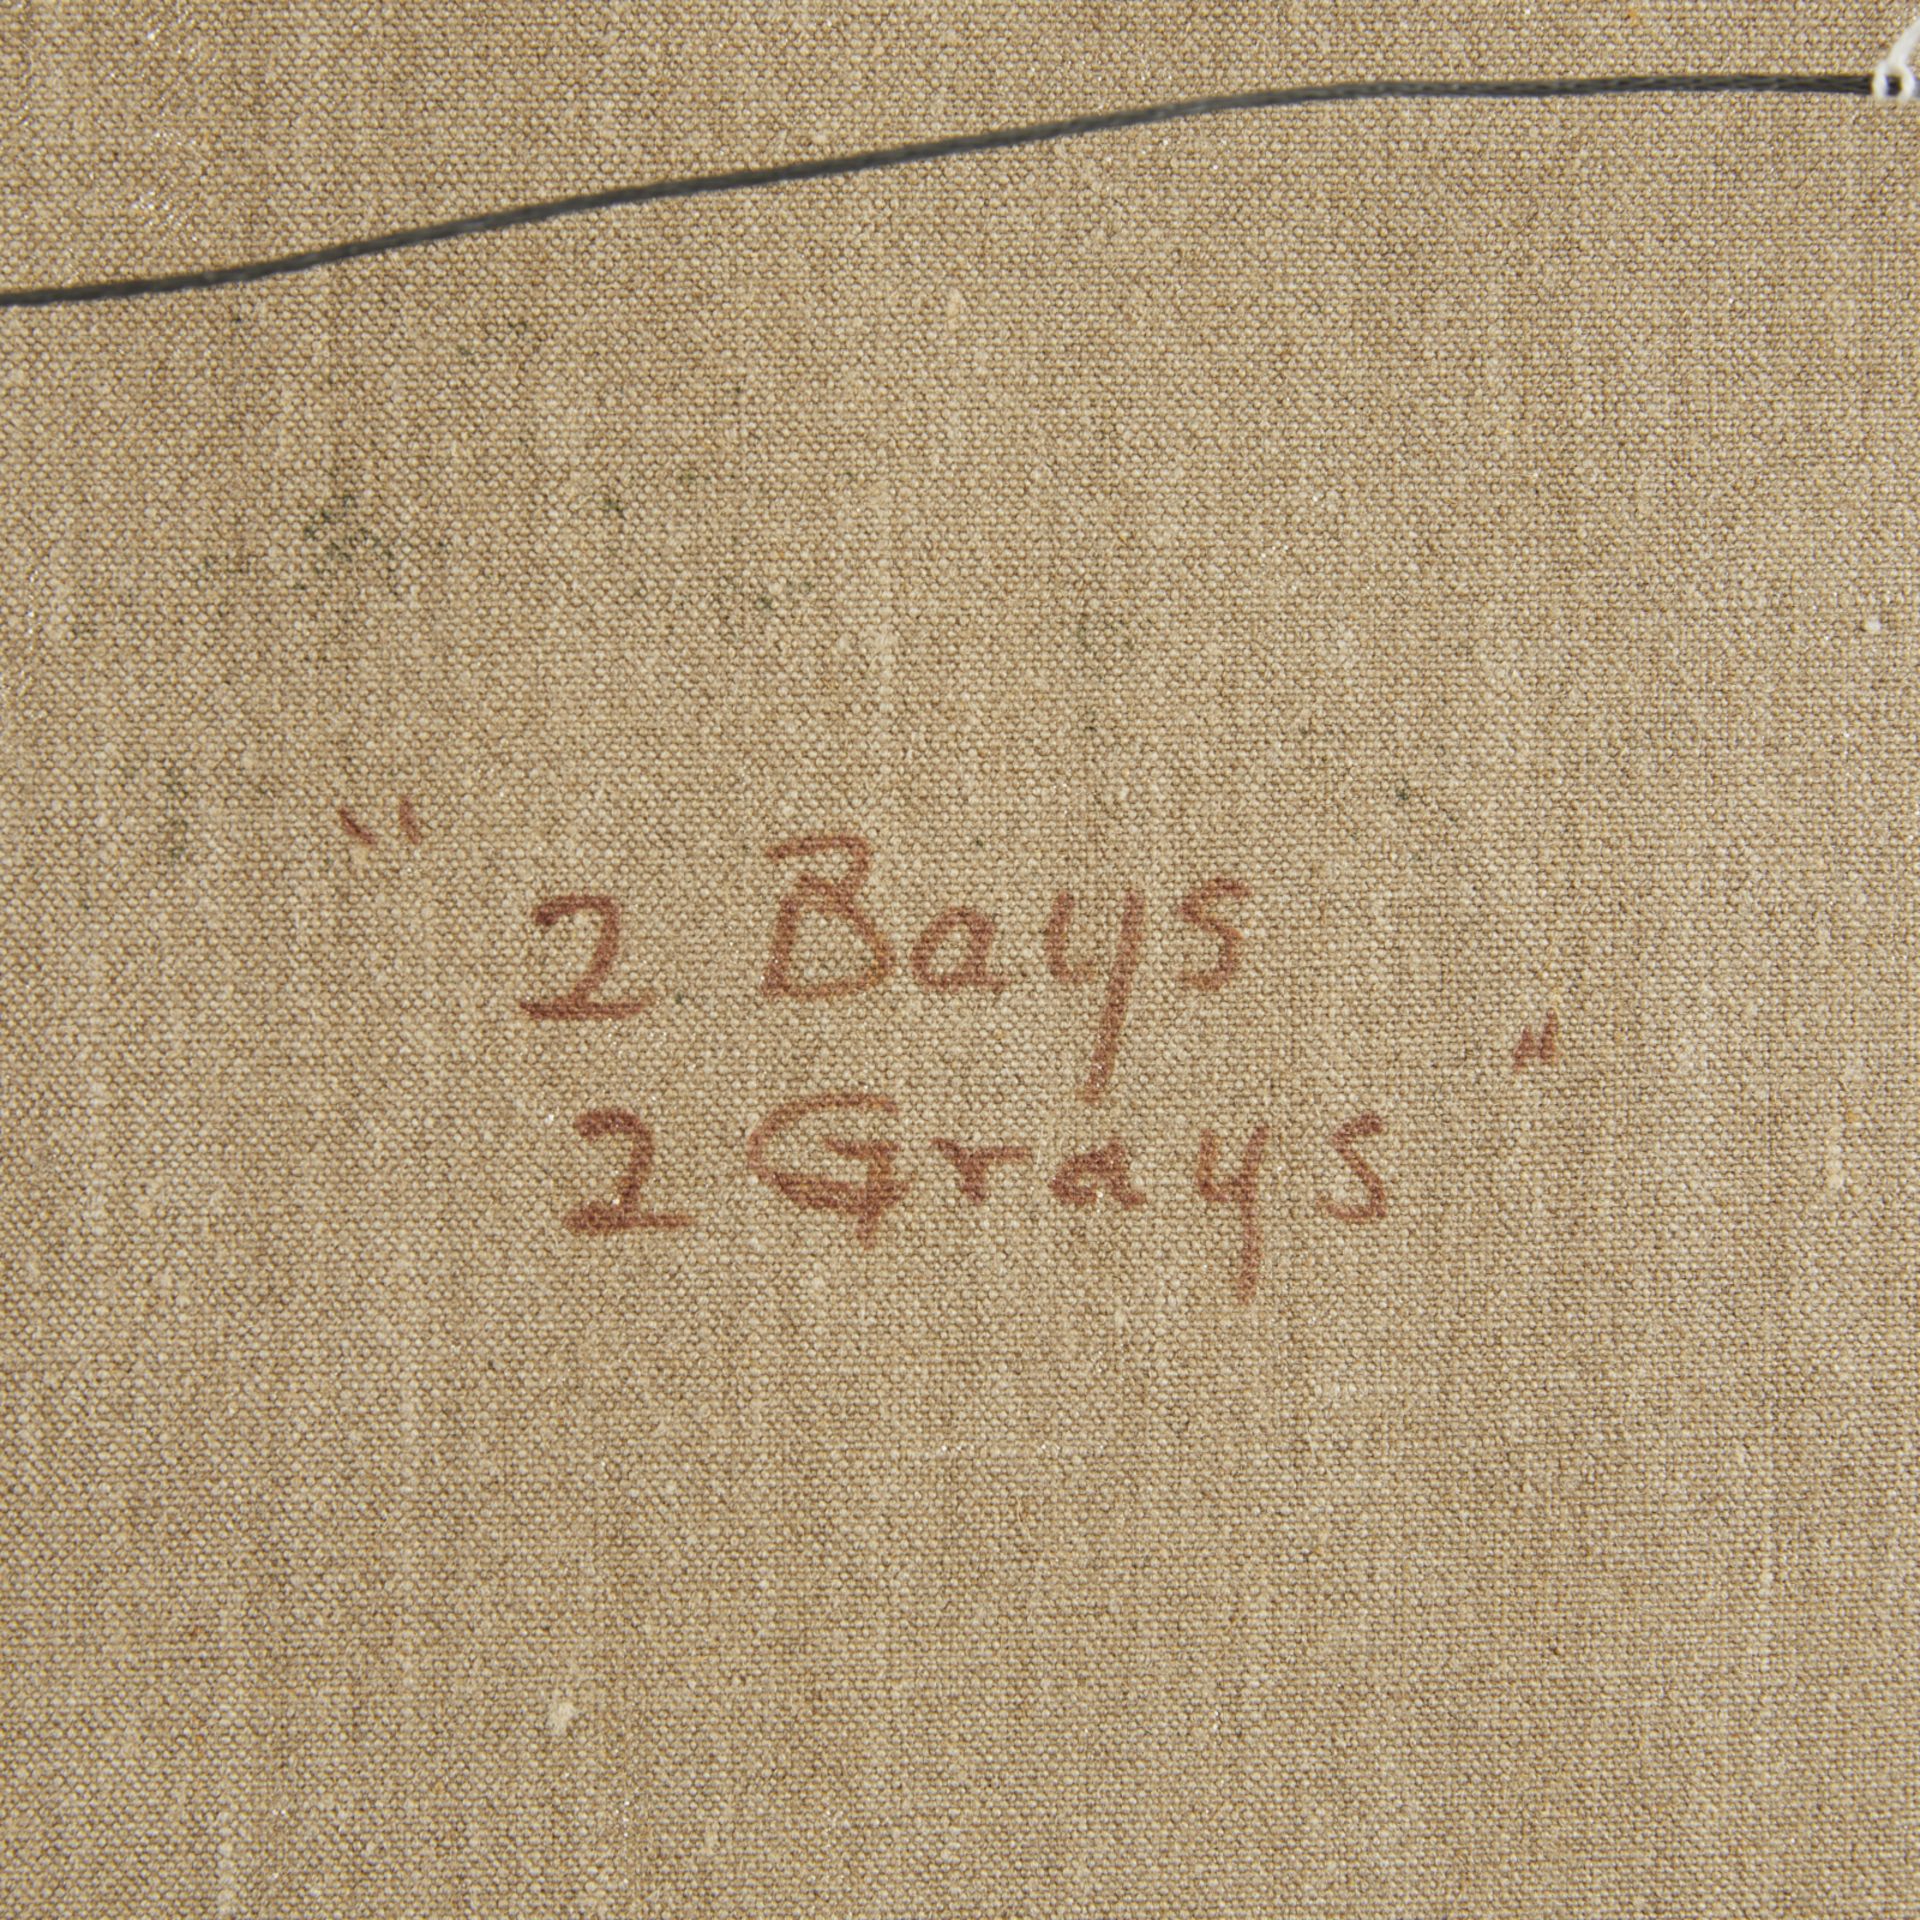 Cameron Booth "2 Bays 2 Greys" Horse Painting 1972 - Image 7 of 13